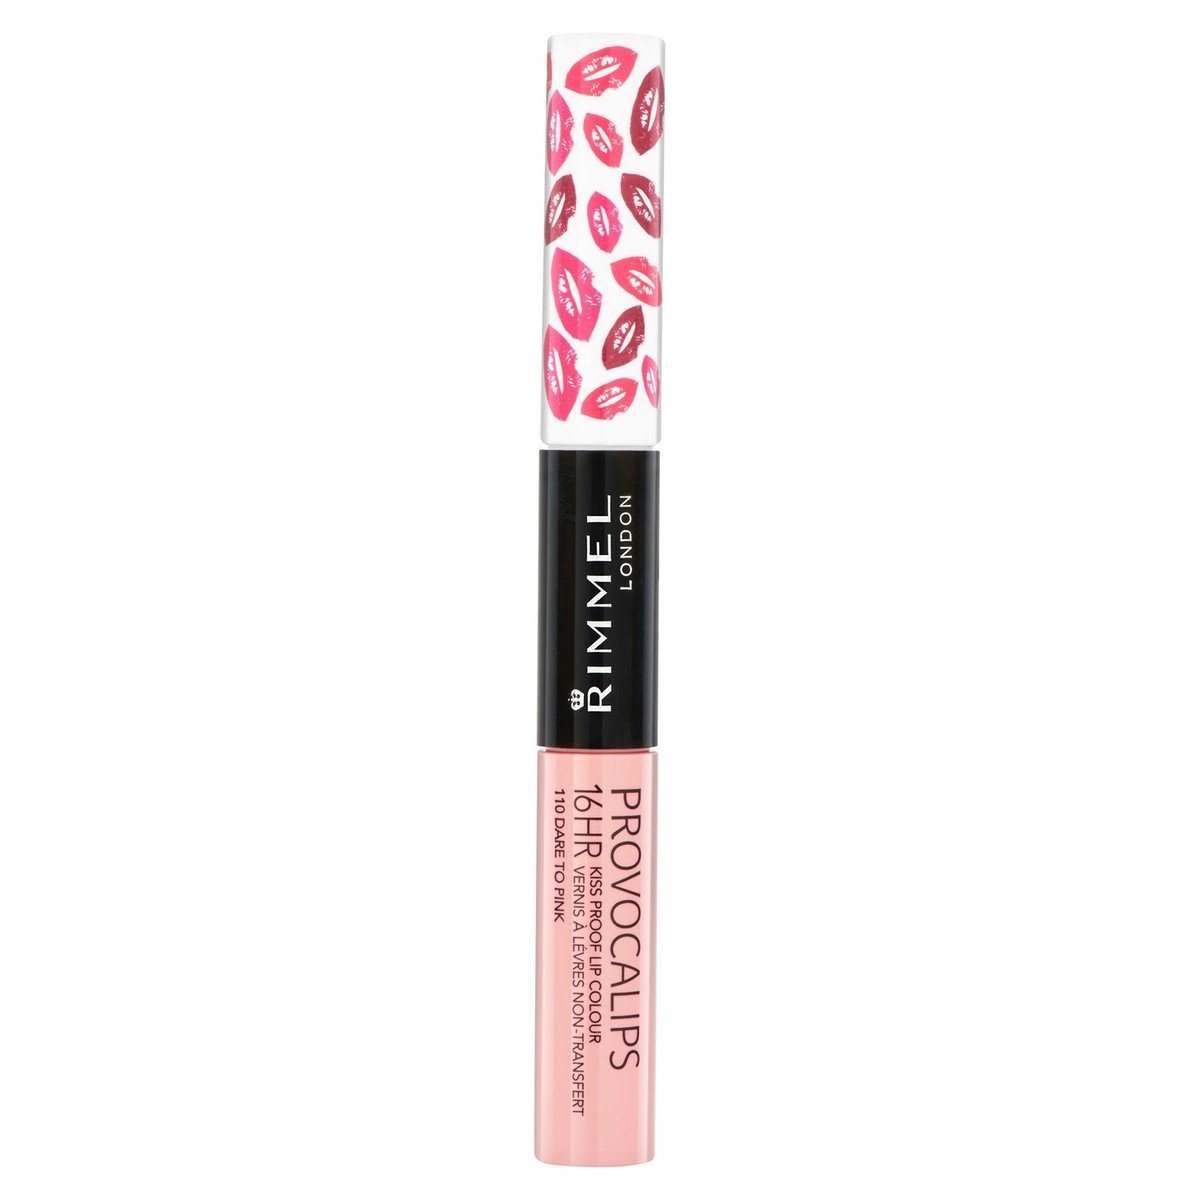 Rimmel London Provocalips 16Hr Kissproof Lip Colour - Dare To Pink 1pc